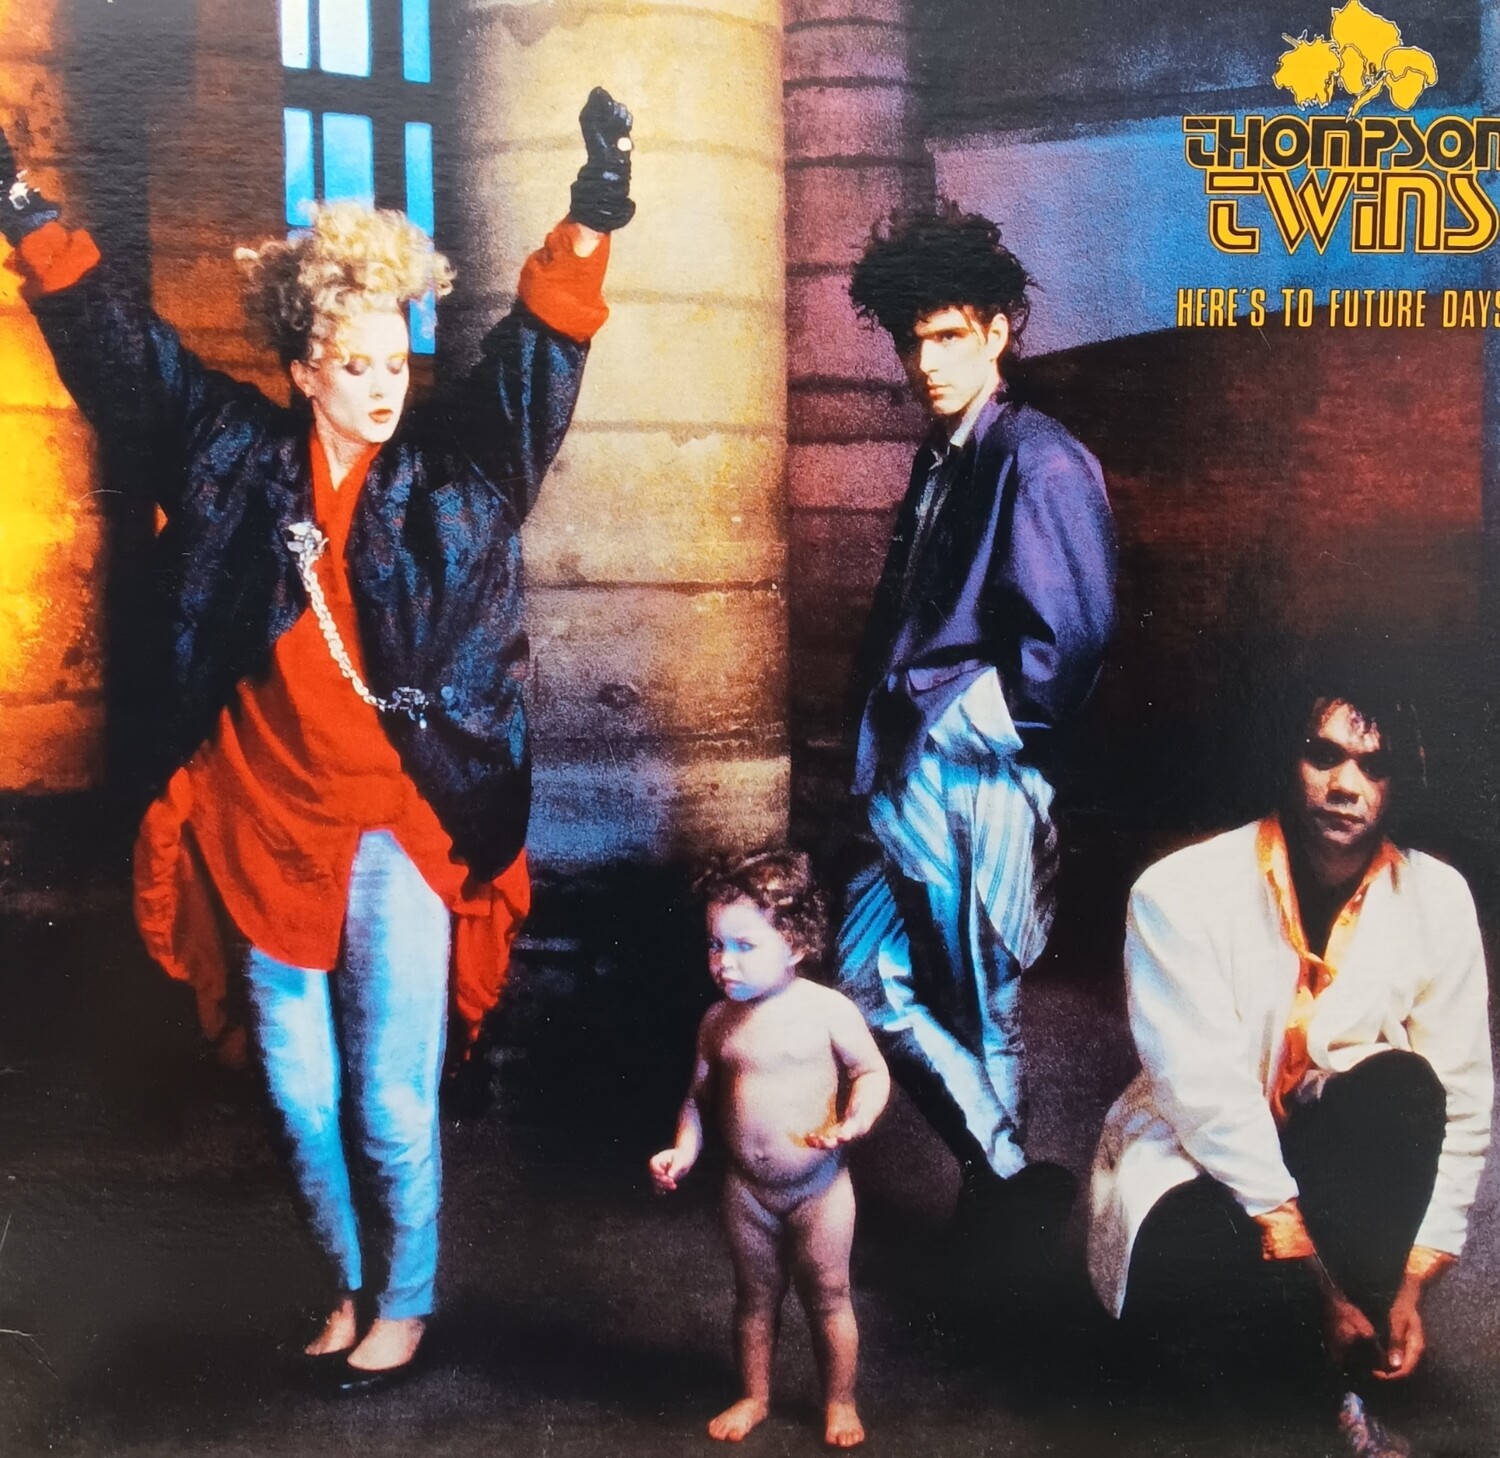 THOMPSON TWINS - Here's to future days